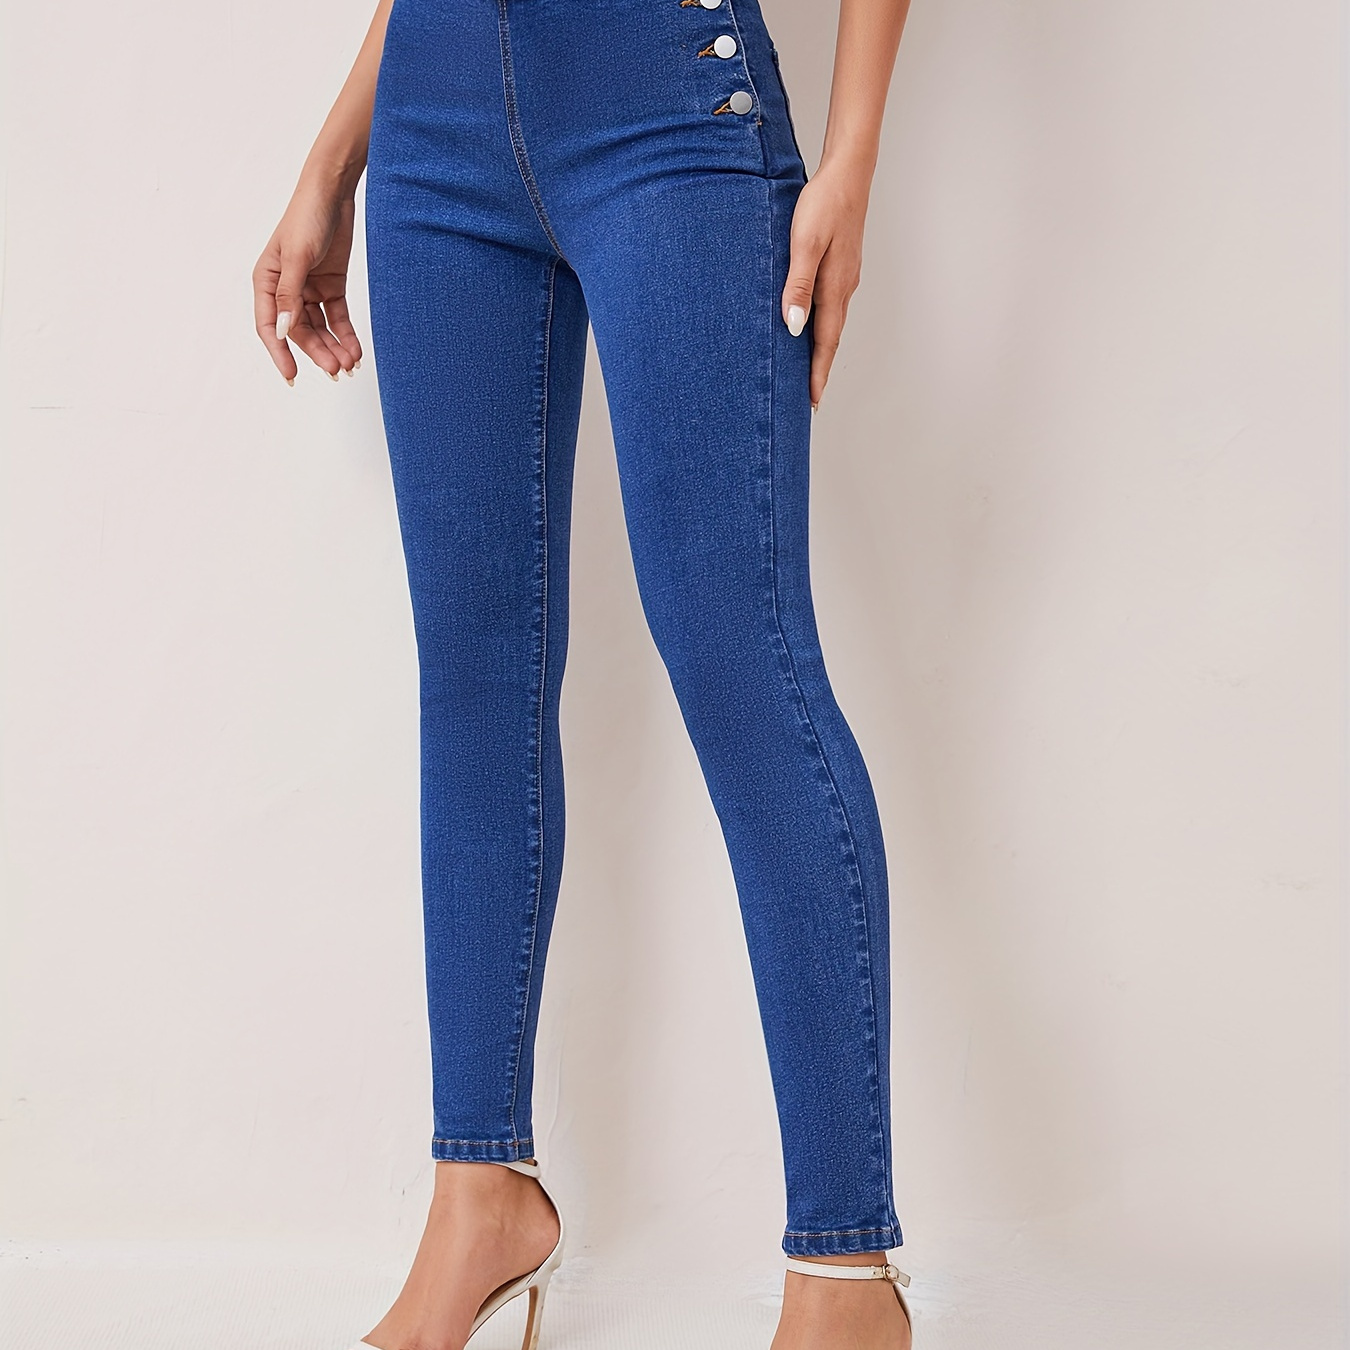 

Side Single-breasted High Rise Denim Pants, Plain High Stretch Skinny Jeans, Women's Denim Jeans & Clothing